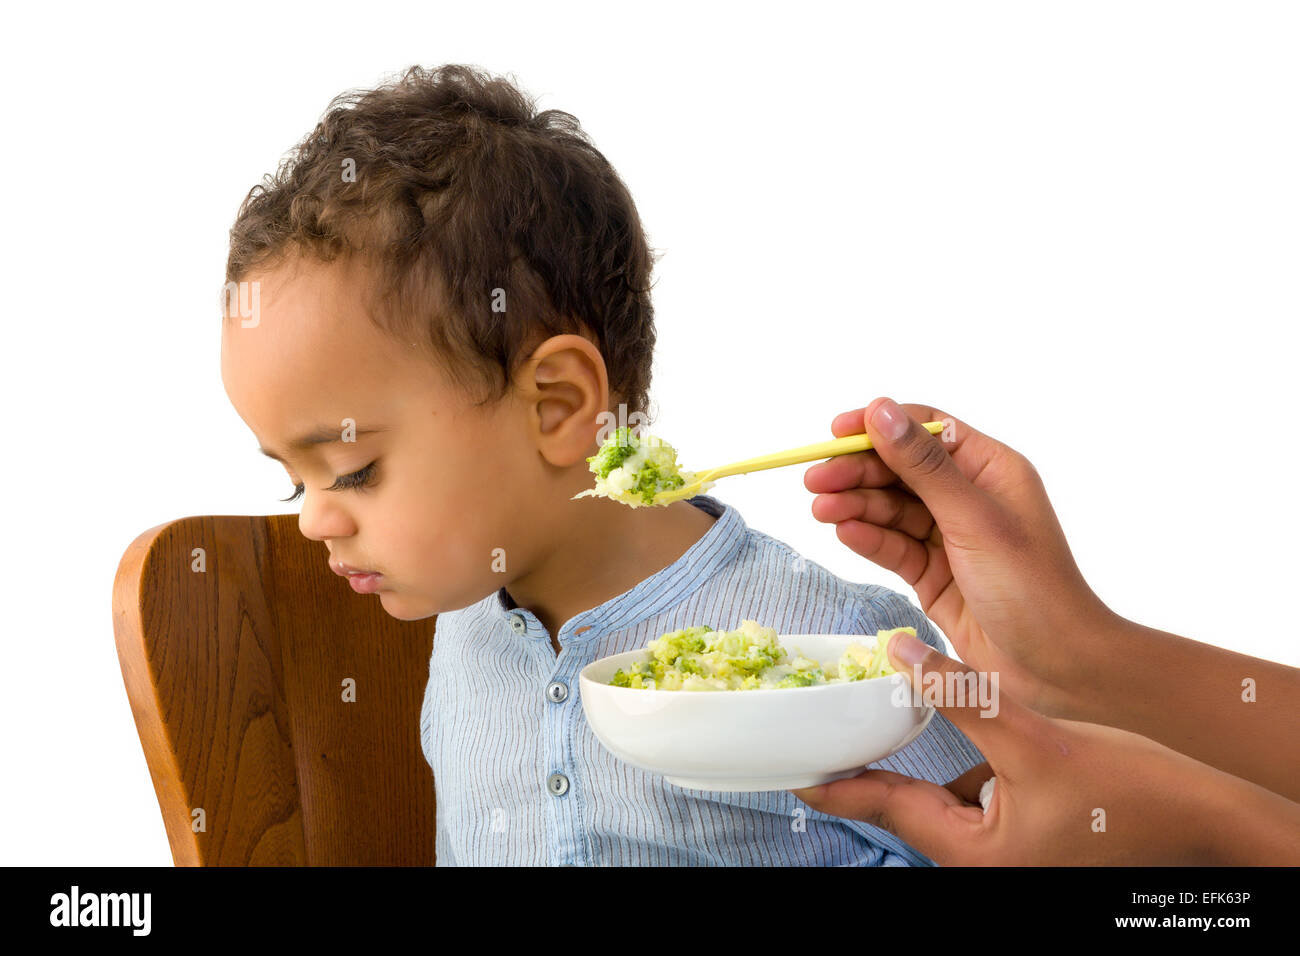 18 months old toddler refusing to eat his vegetables Stock Photo